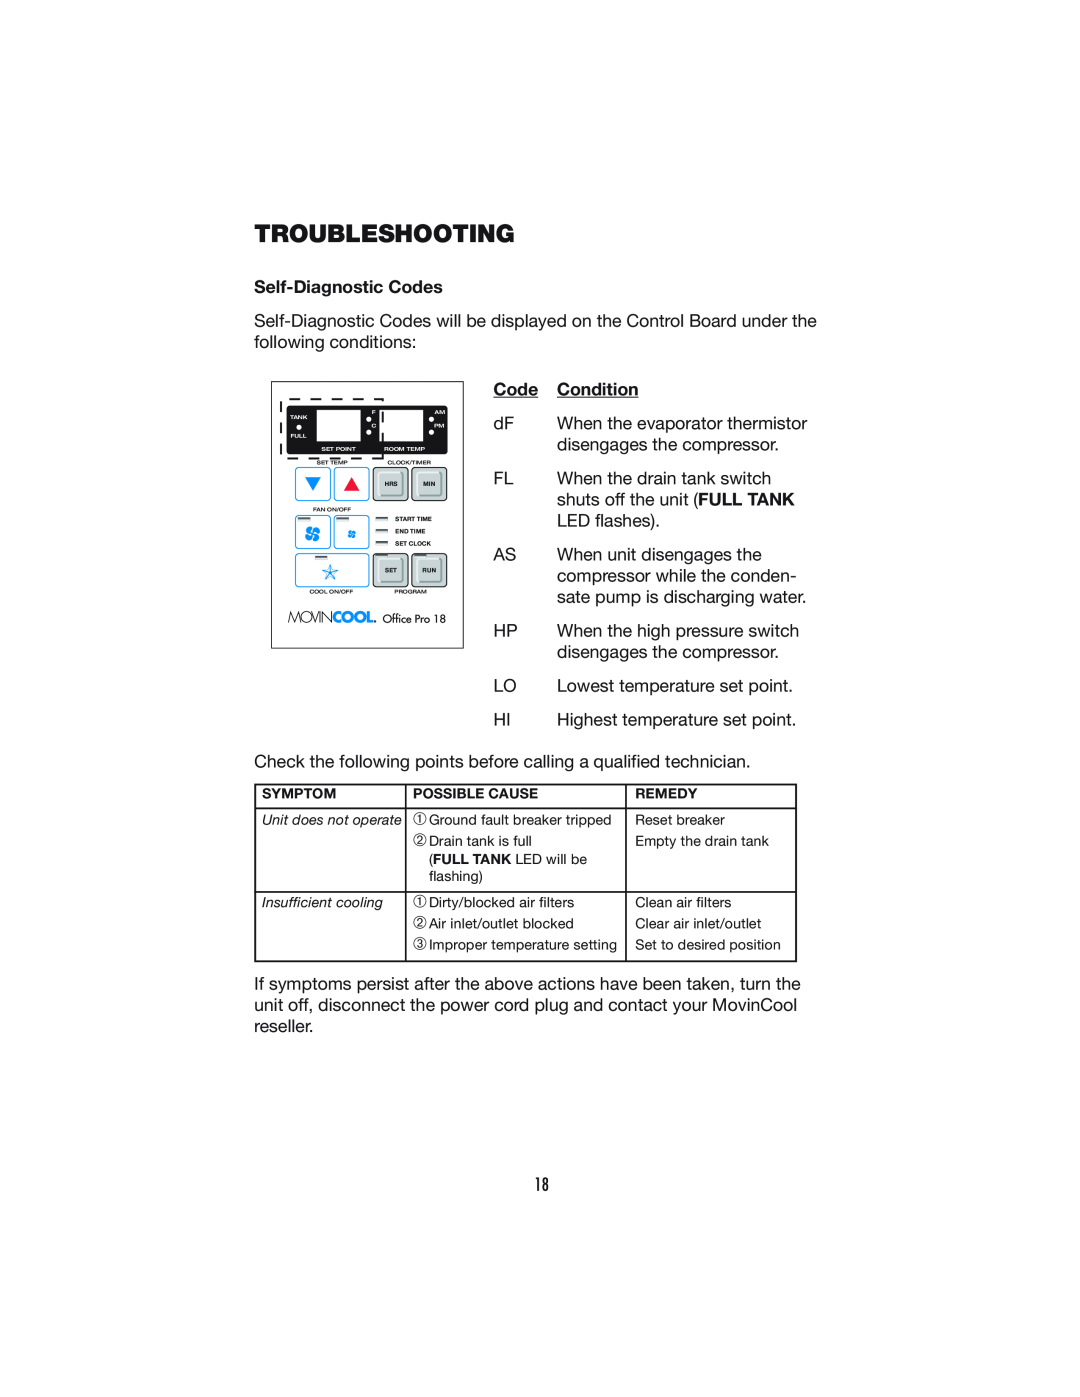 Denso PRO 18 operation manual Troubleshooting, Self-DiagnosticCodes, Condition 